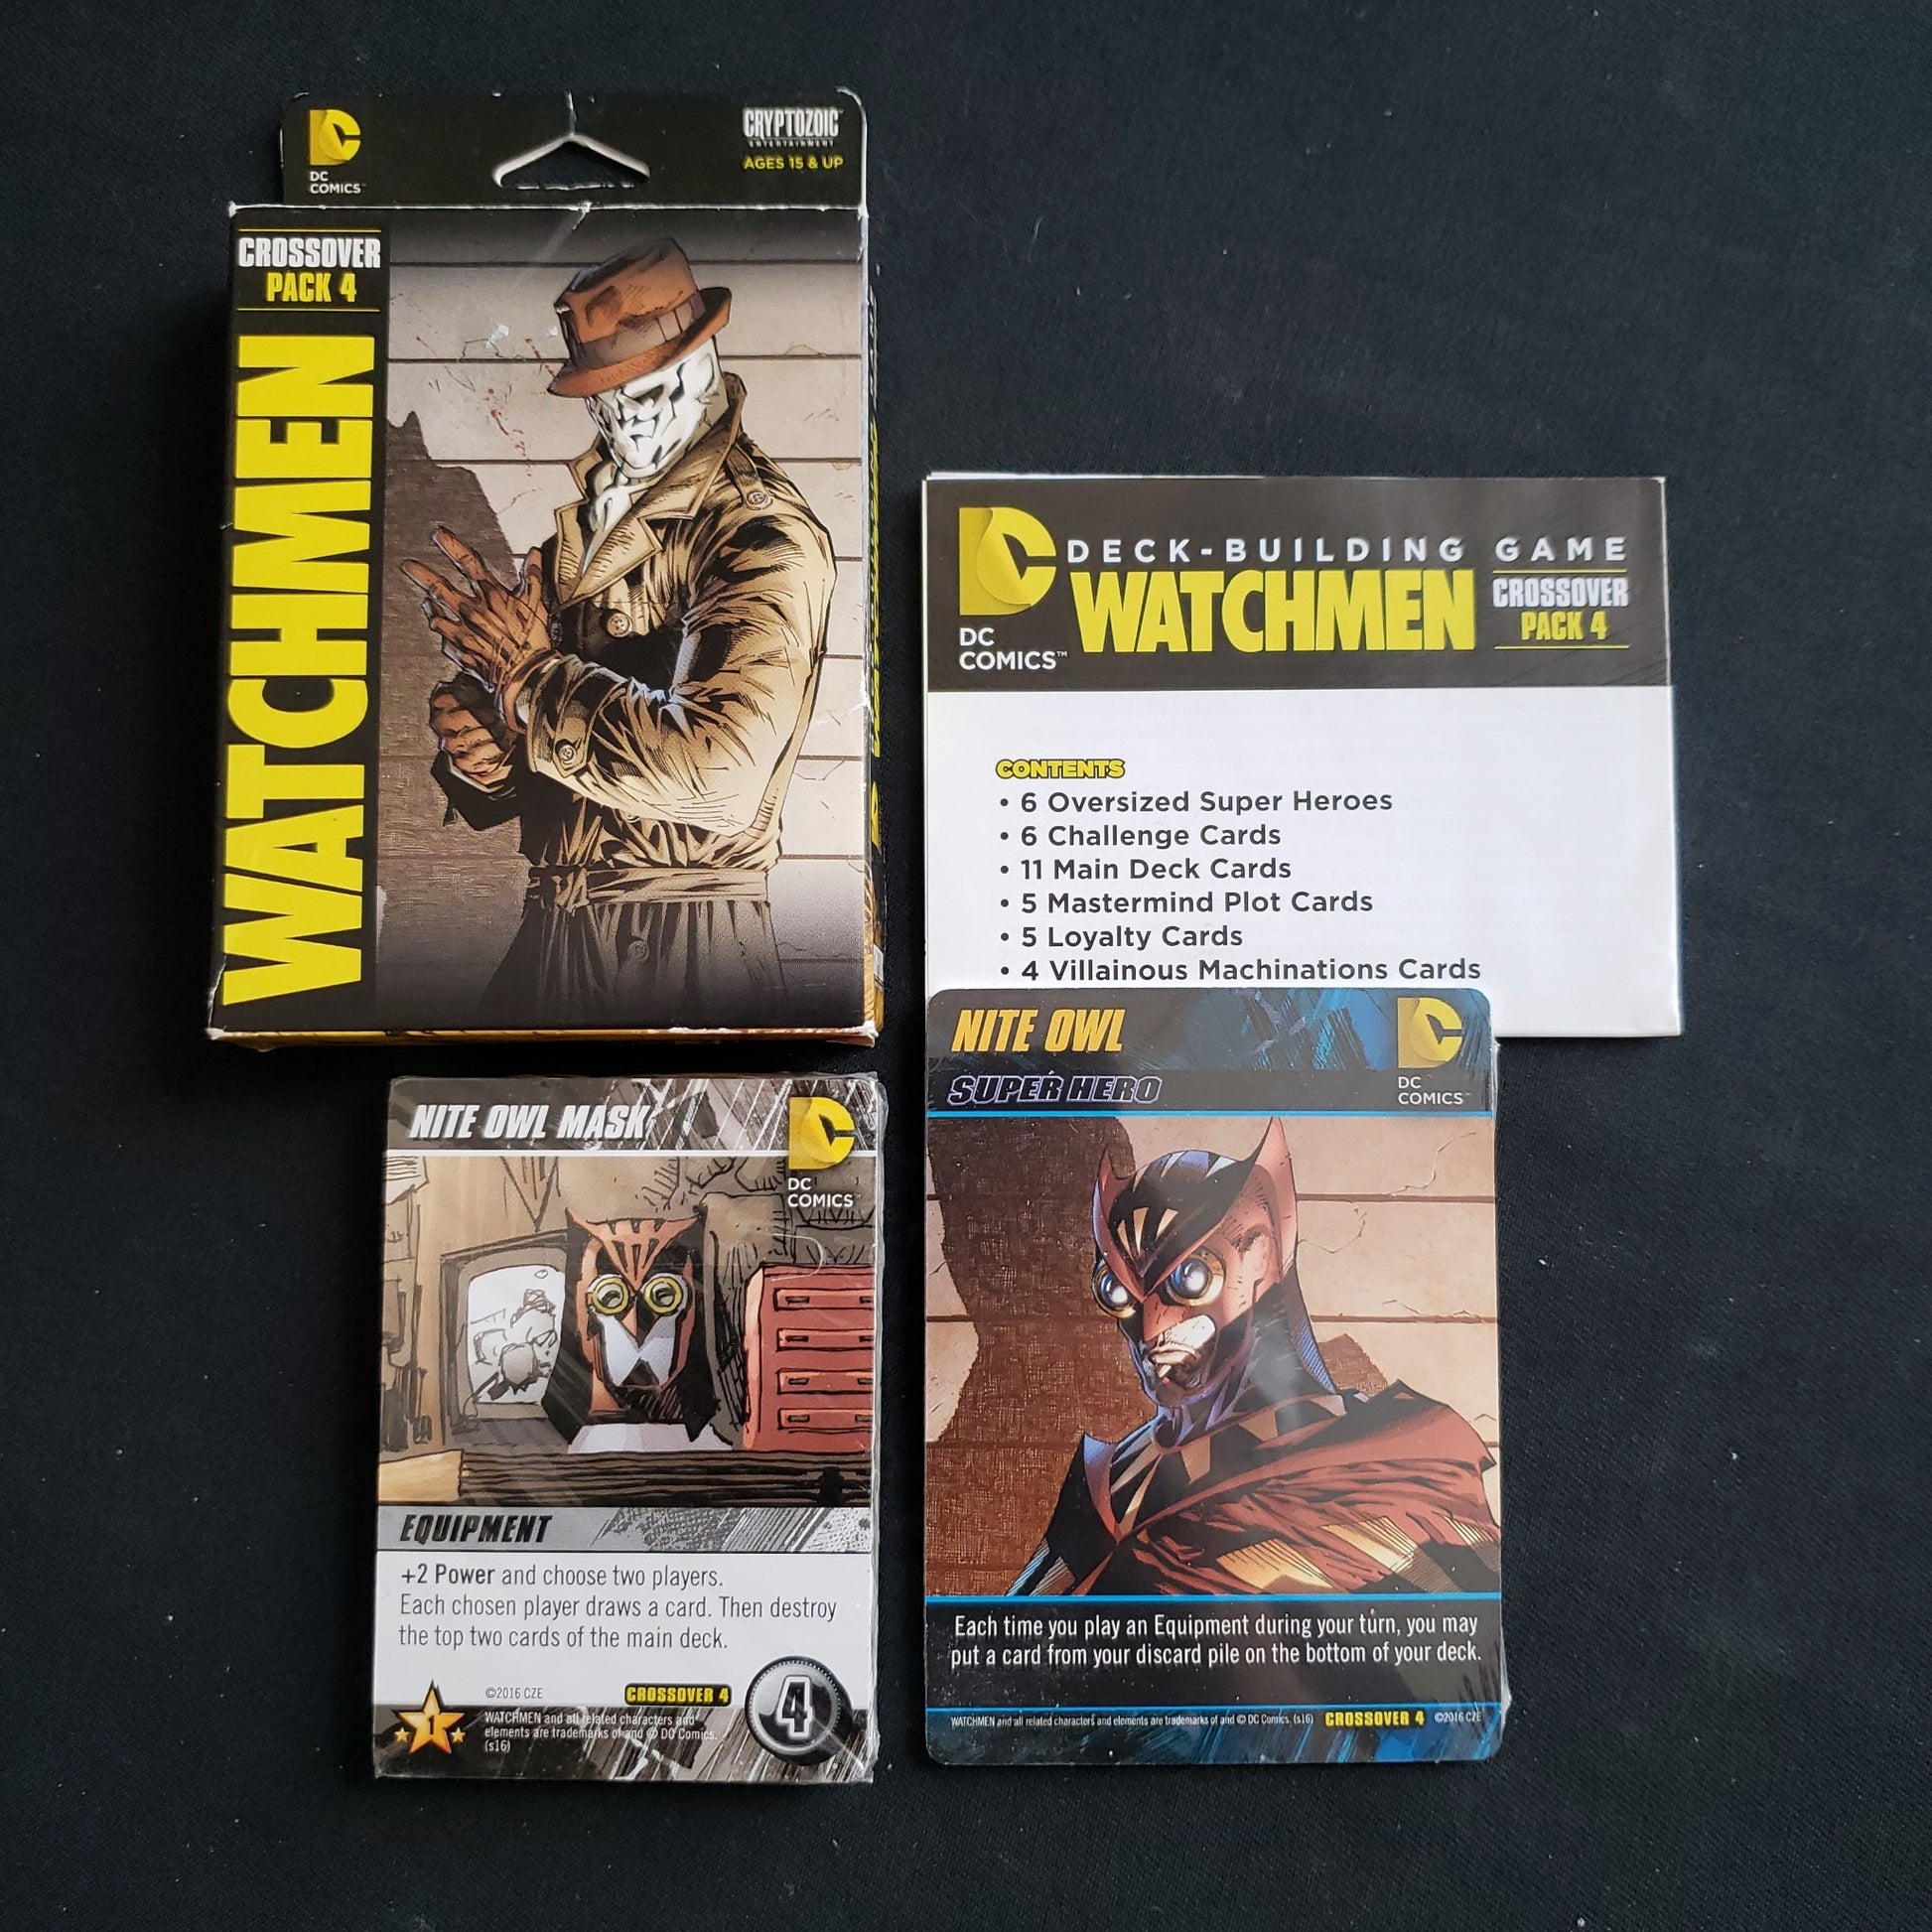 Image shows the front cover of the box of the Watchmen Crossover Pack expansion for the DC Comics Deckbuilding card game, along with the cards in shrinkwrap next to it